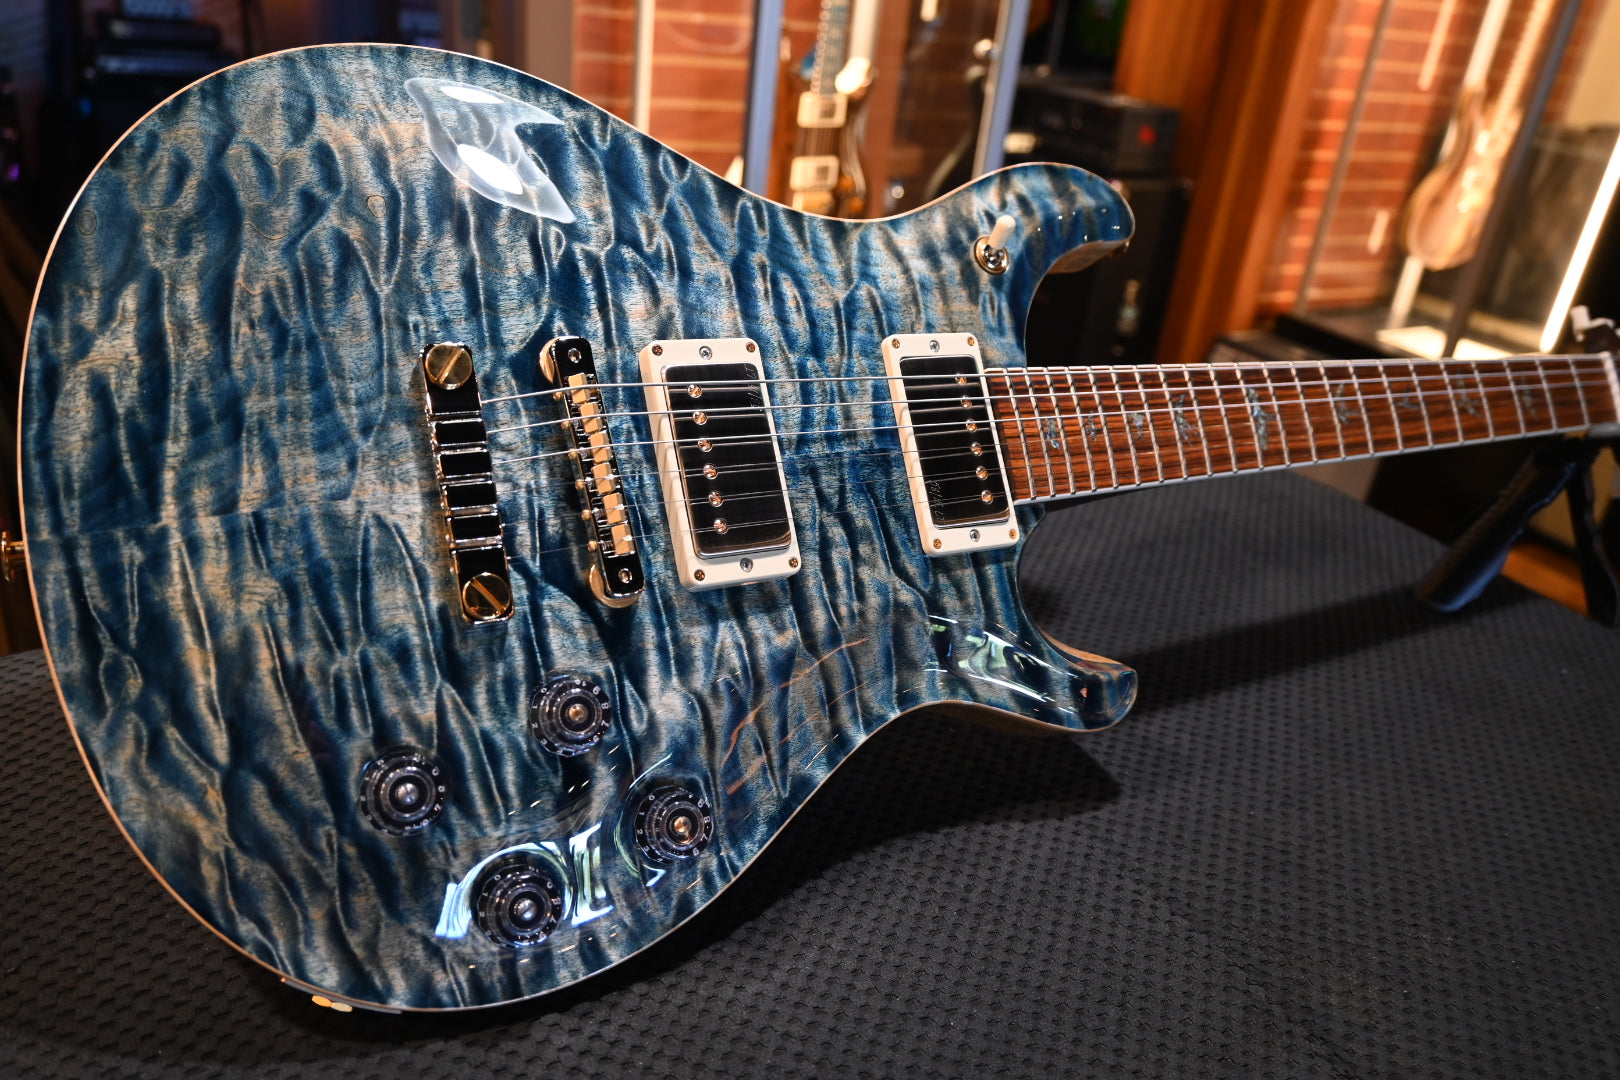 PRS Wood Library McCarty 594 10-Top Quilt Rosewood Neck - Faded Whale Blue Natural Back Guitar #8978 - Danville Music